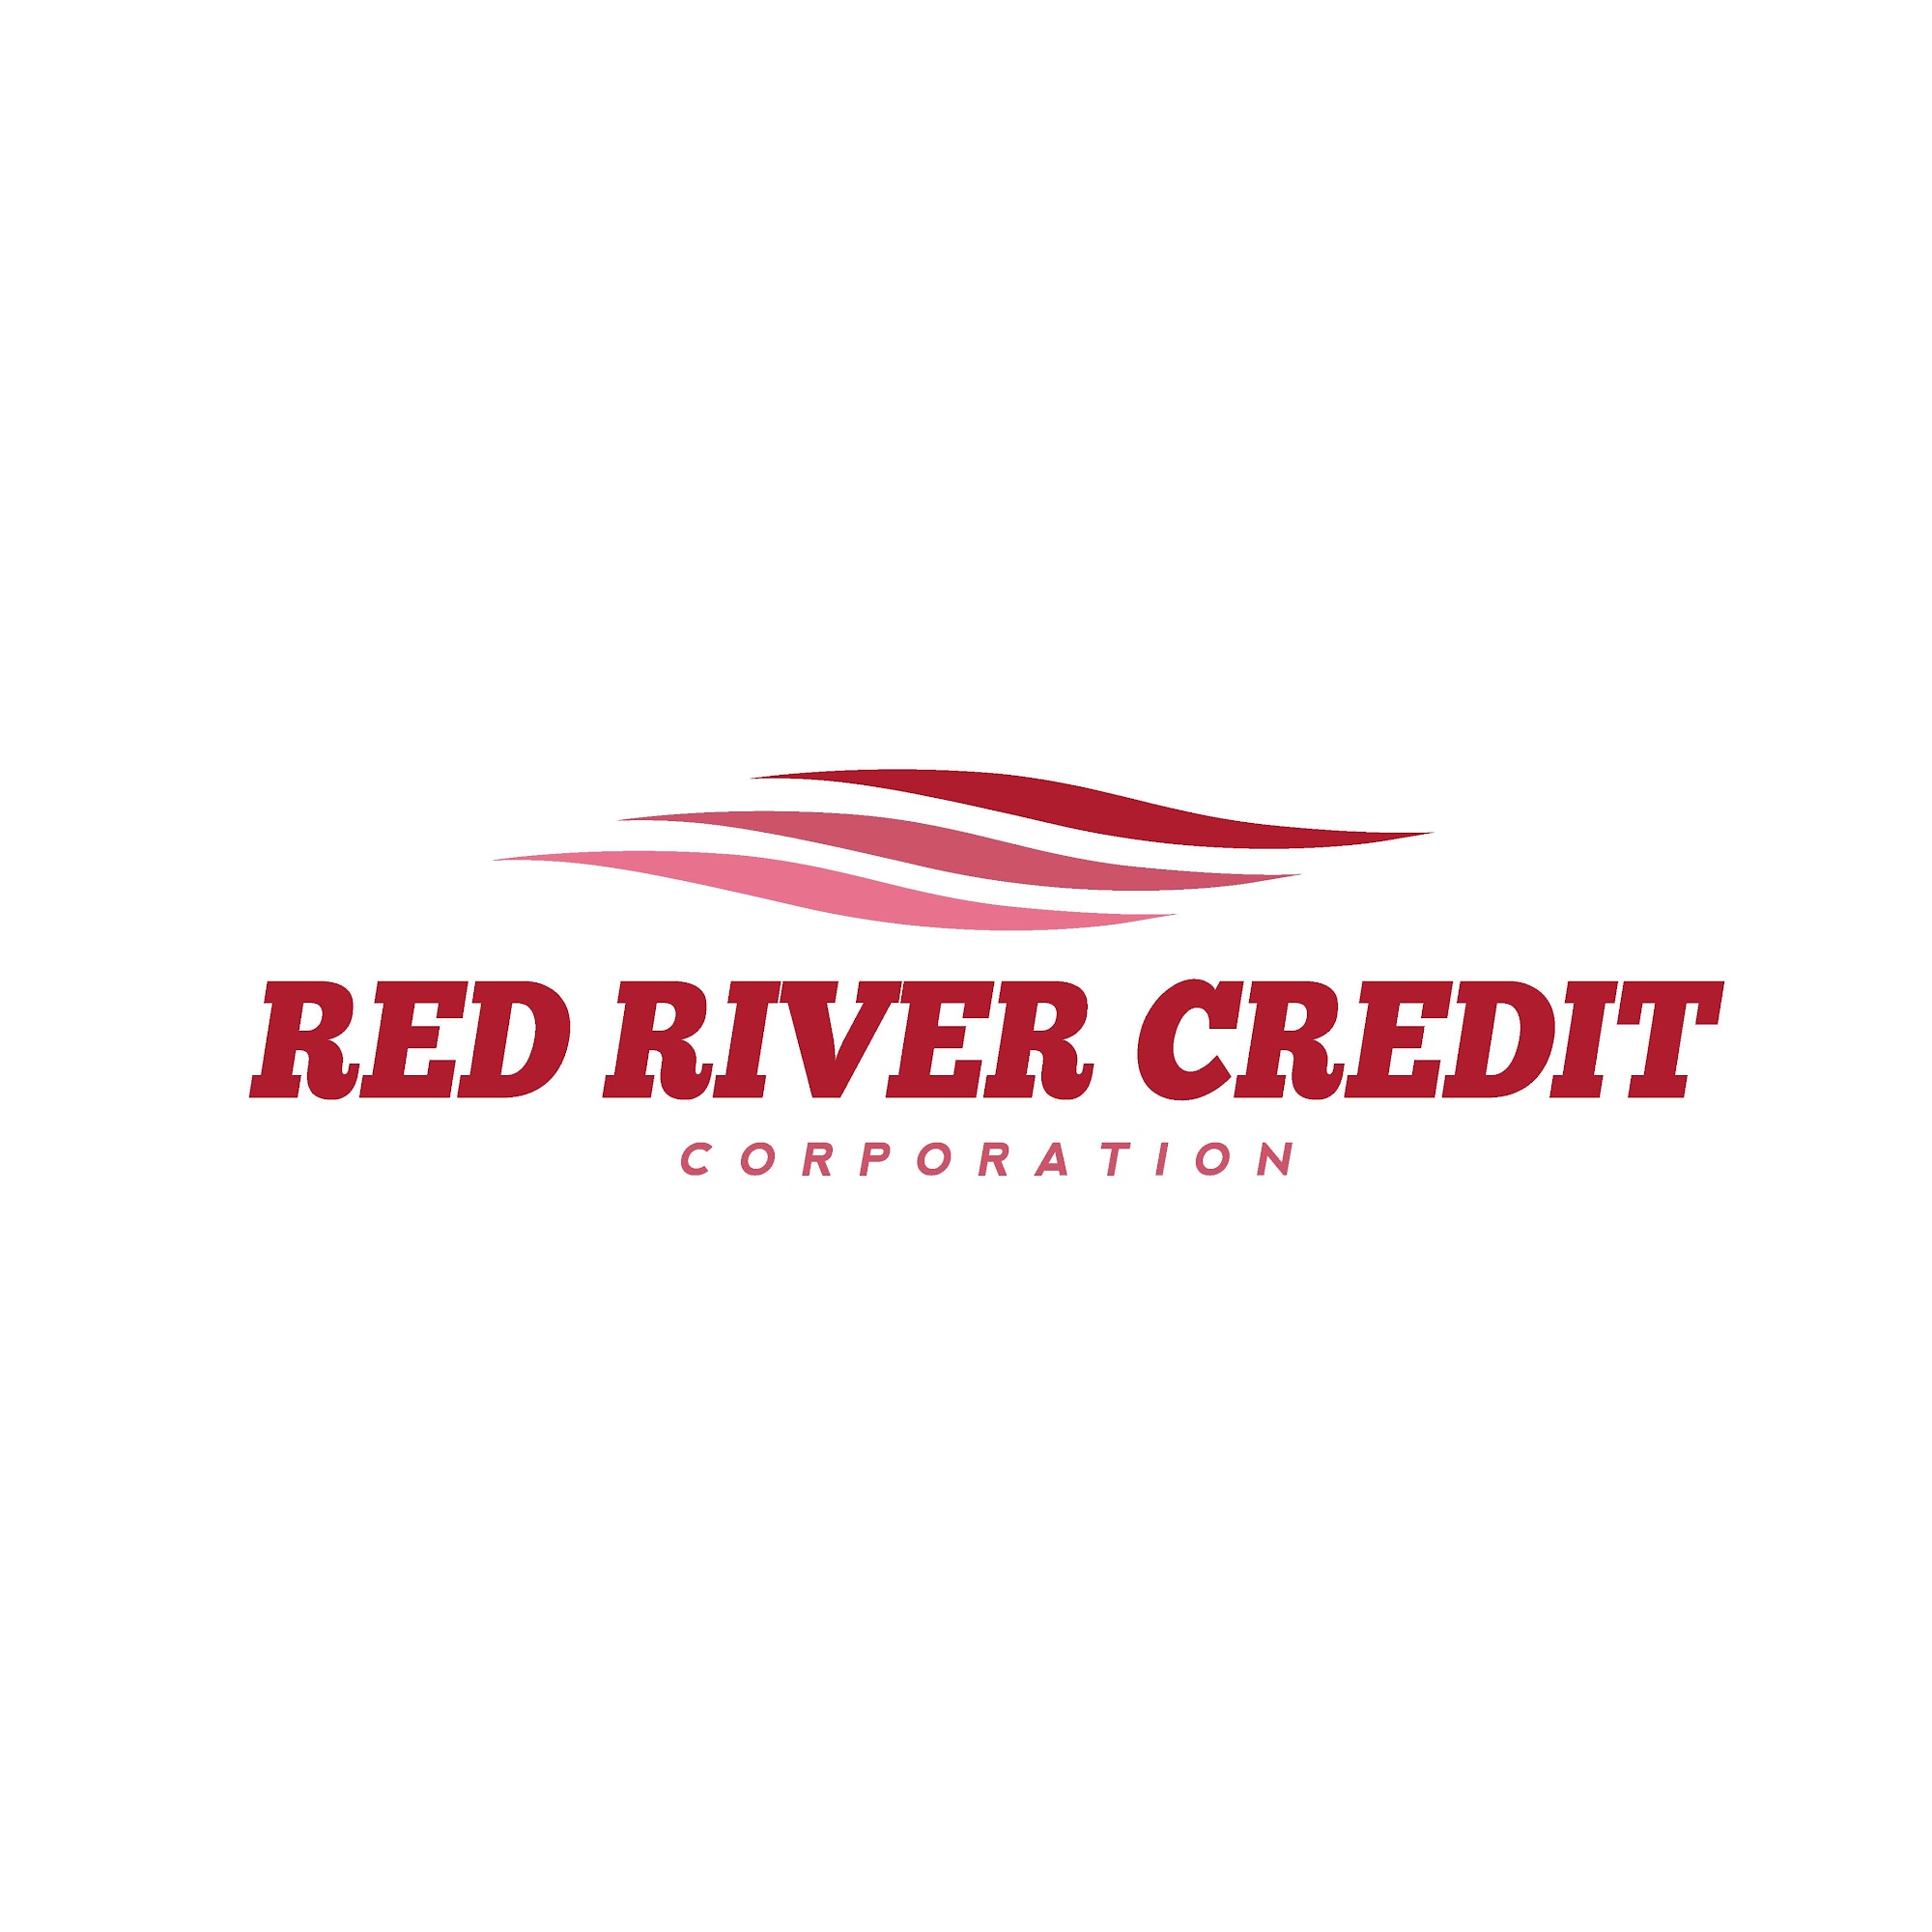 Red River Credit Corporation 906 W Ruth Ave, Sallisaw Oklahoma 74955